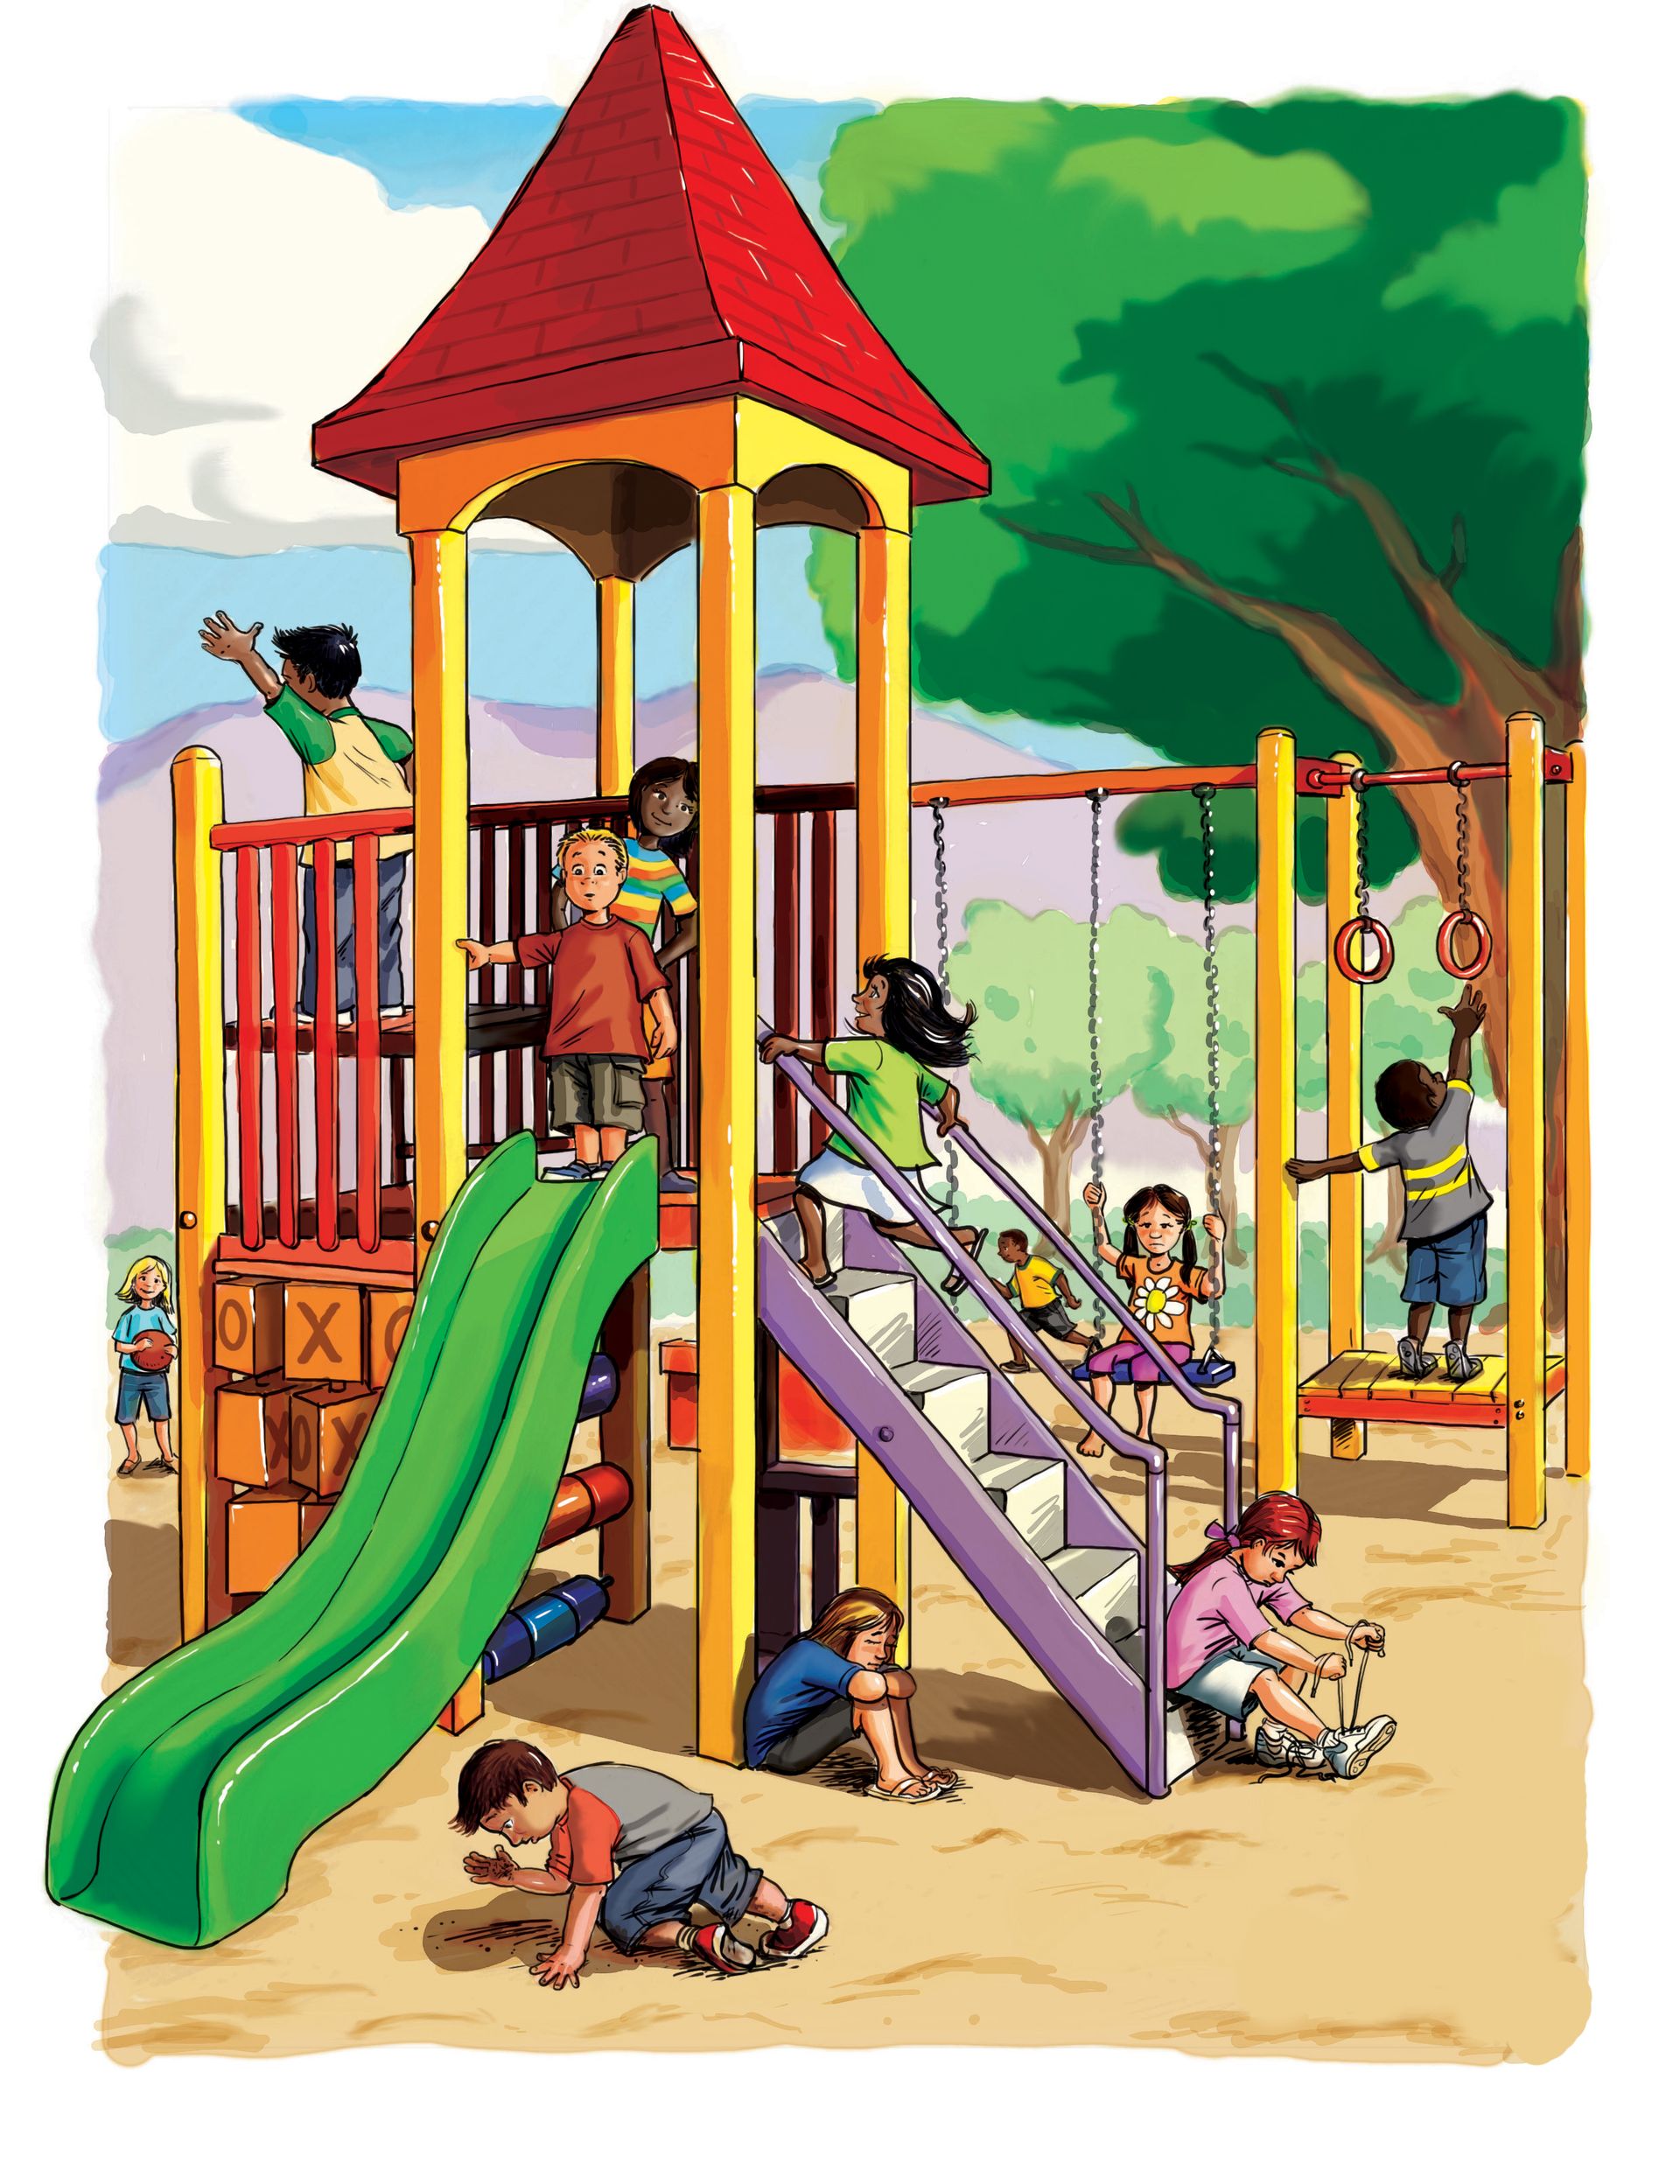 A group of children play at a playground together.